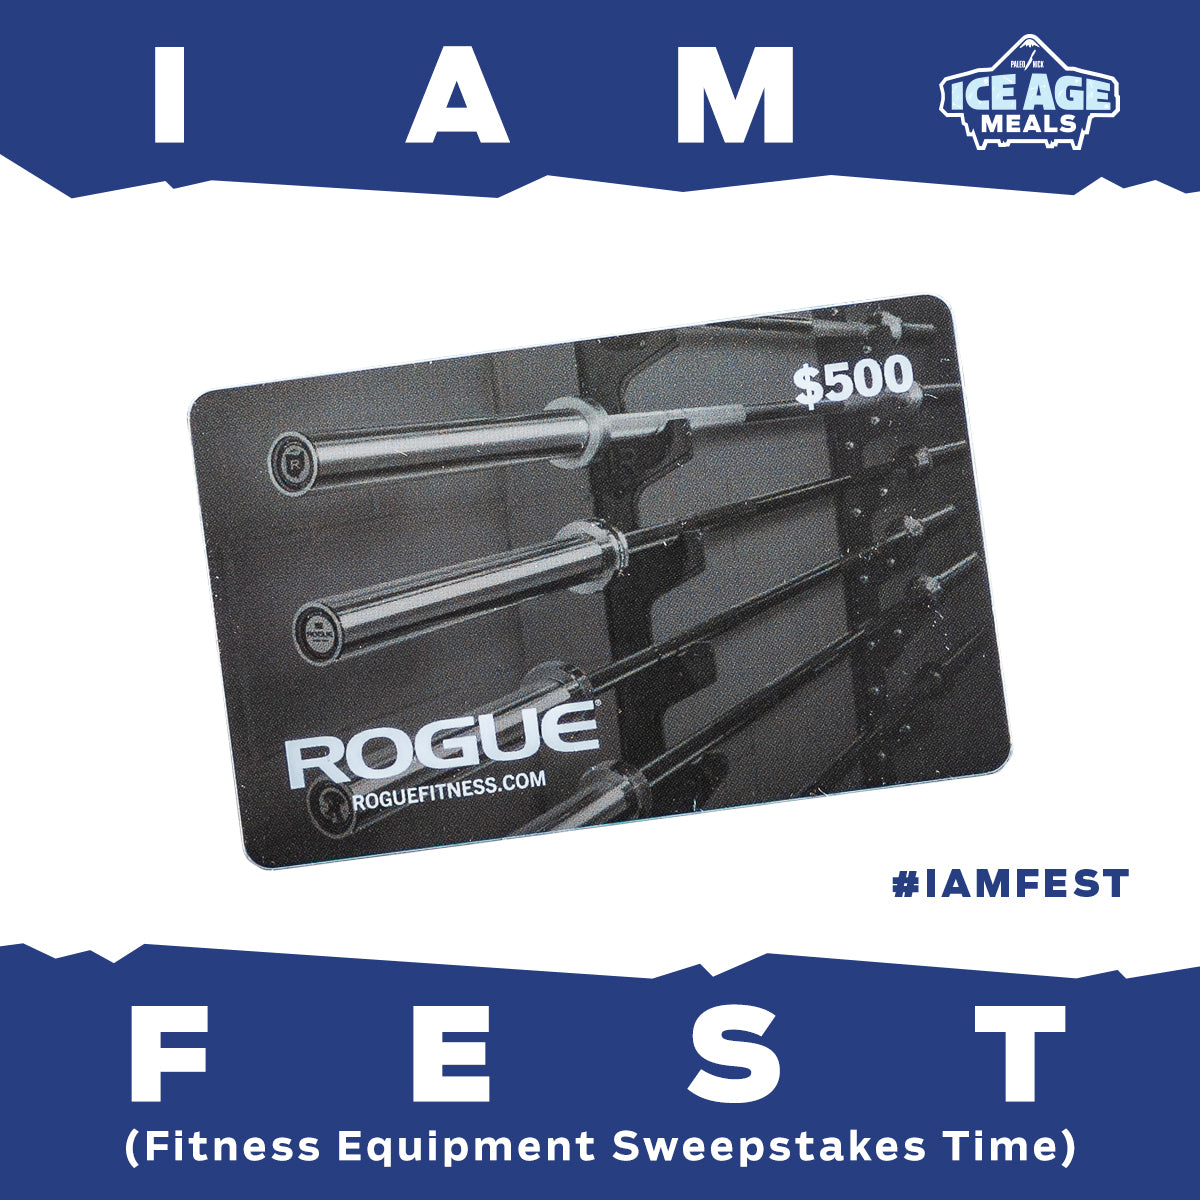 Win A 500 Rogue Fitness Gift Card Ice Age Meals